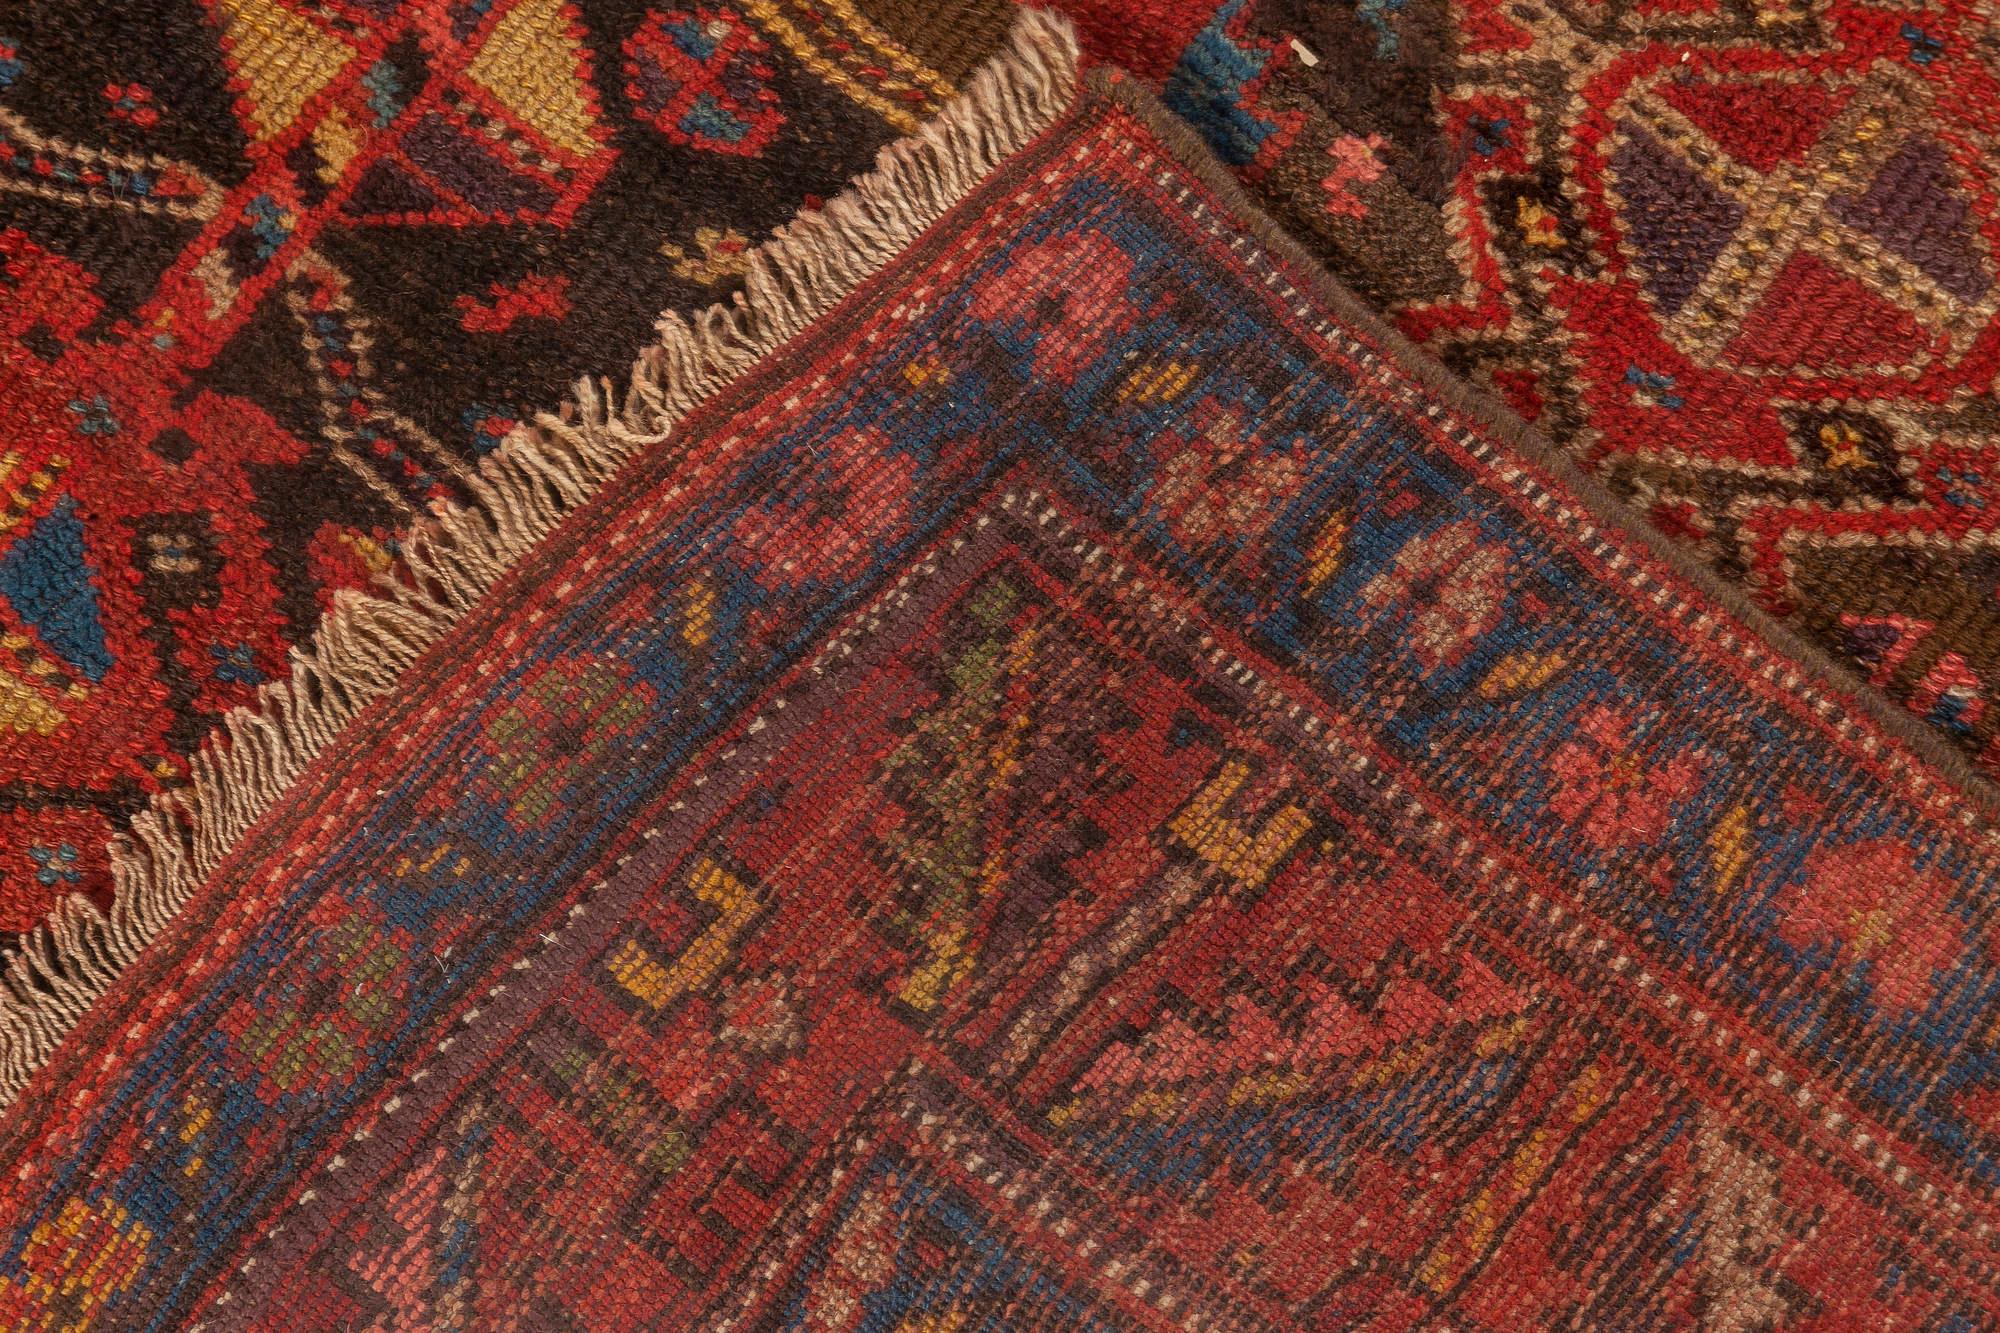 1900s Persian Malayer Geometric Handmade Wool Rug in Red, Blue, Yellow and Black 2